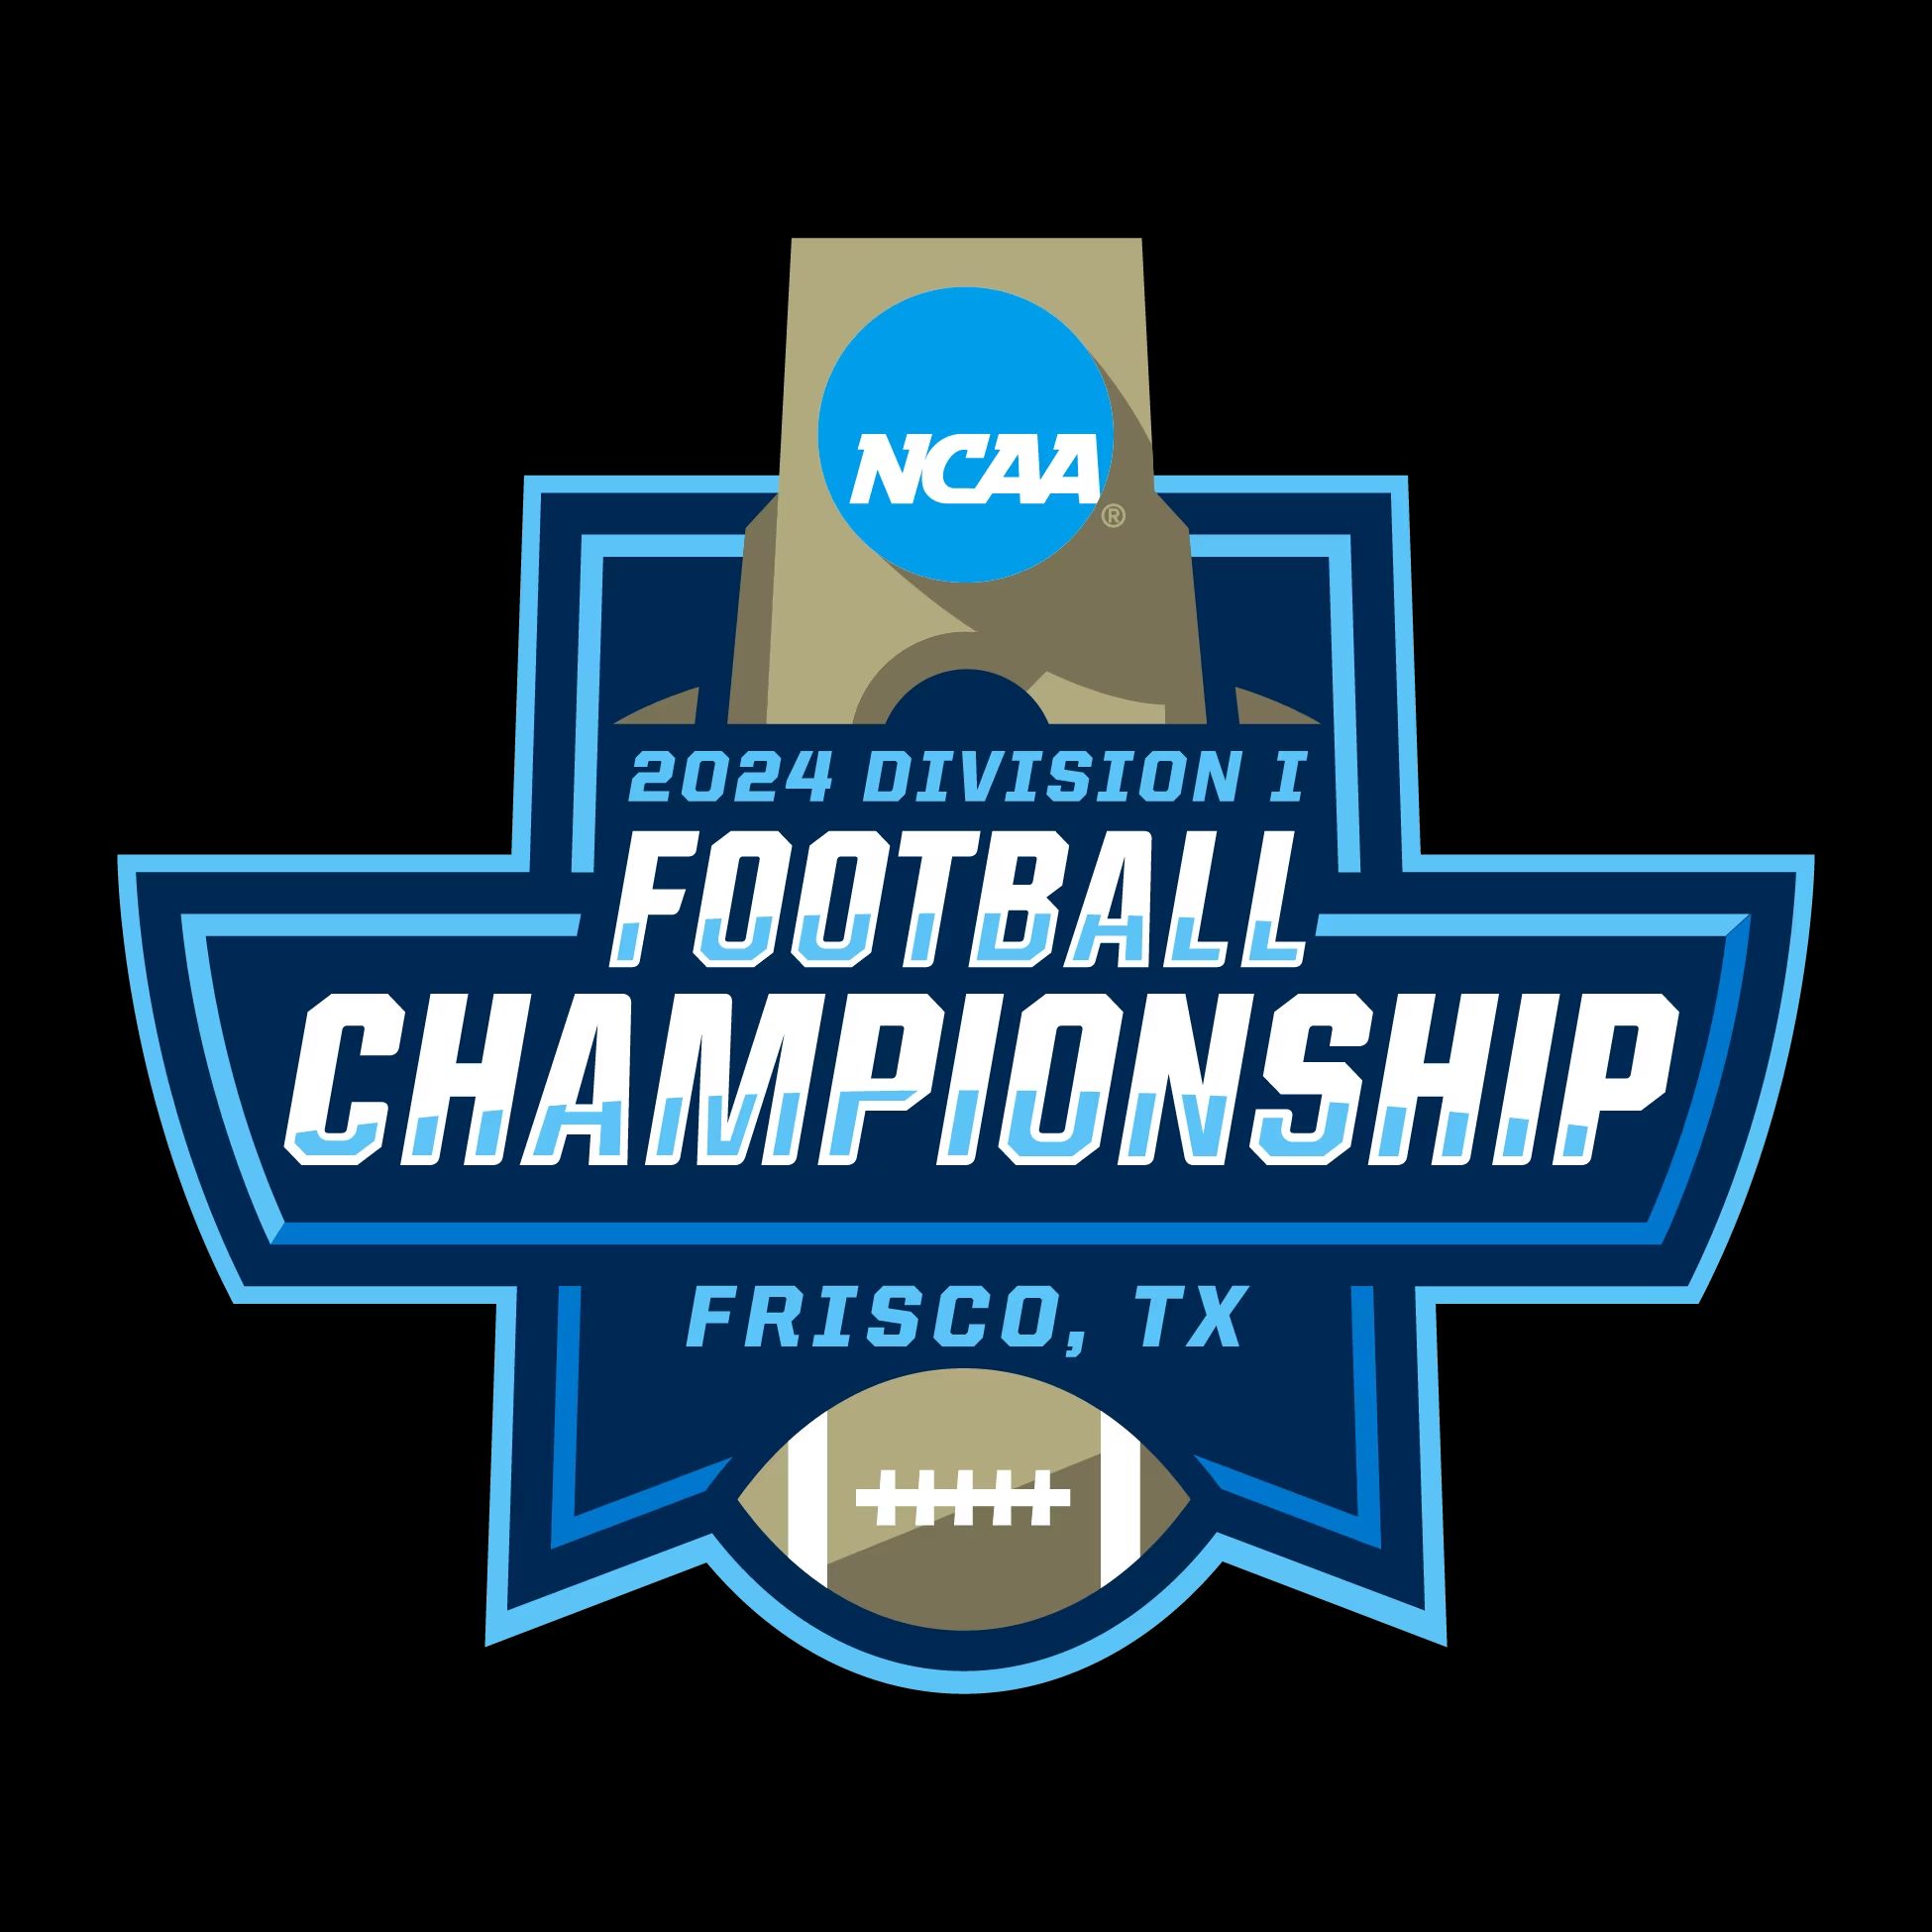 2022 FCS playoff bracket predictions: Teams, seeds, picks less than 1 month  from selections